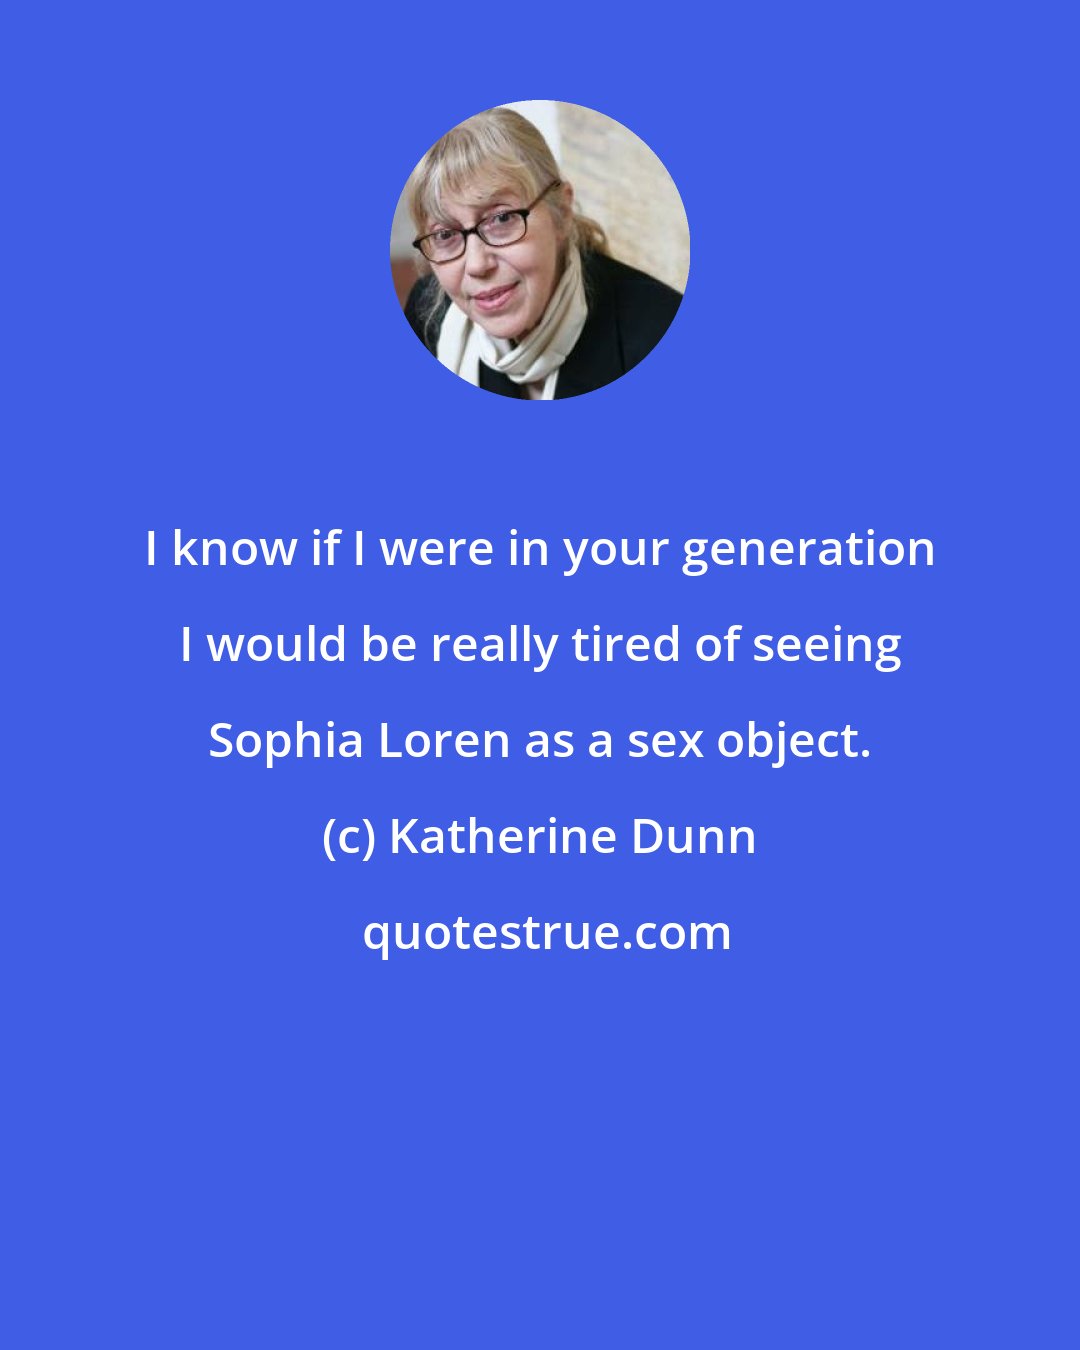 Katherine Dunn: I know if I were in your generation I would be really tired of seeing Sophia Loren as a sex object.